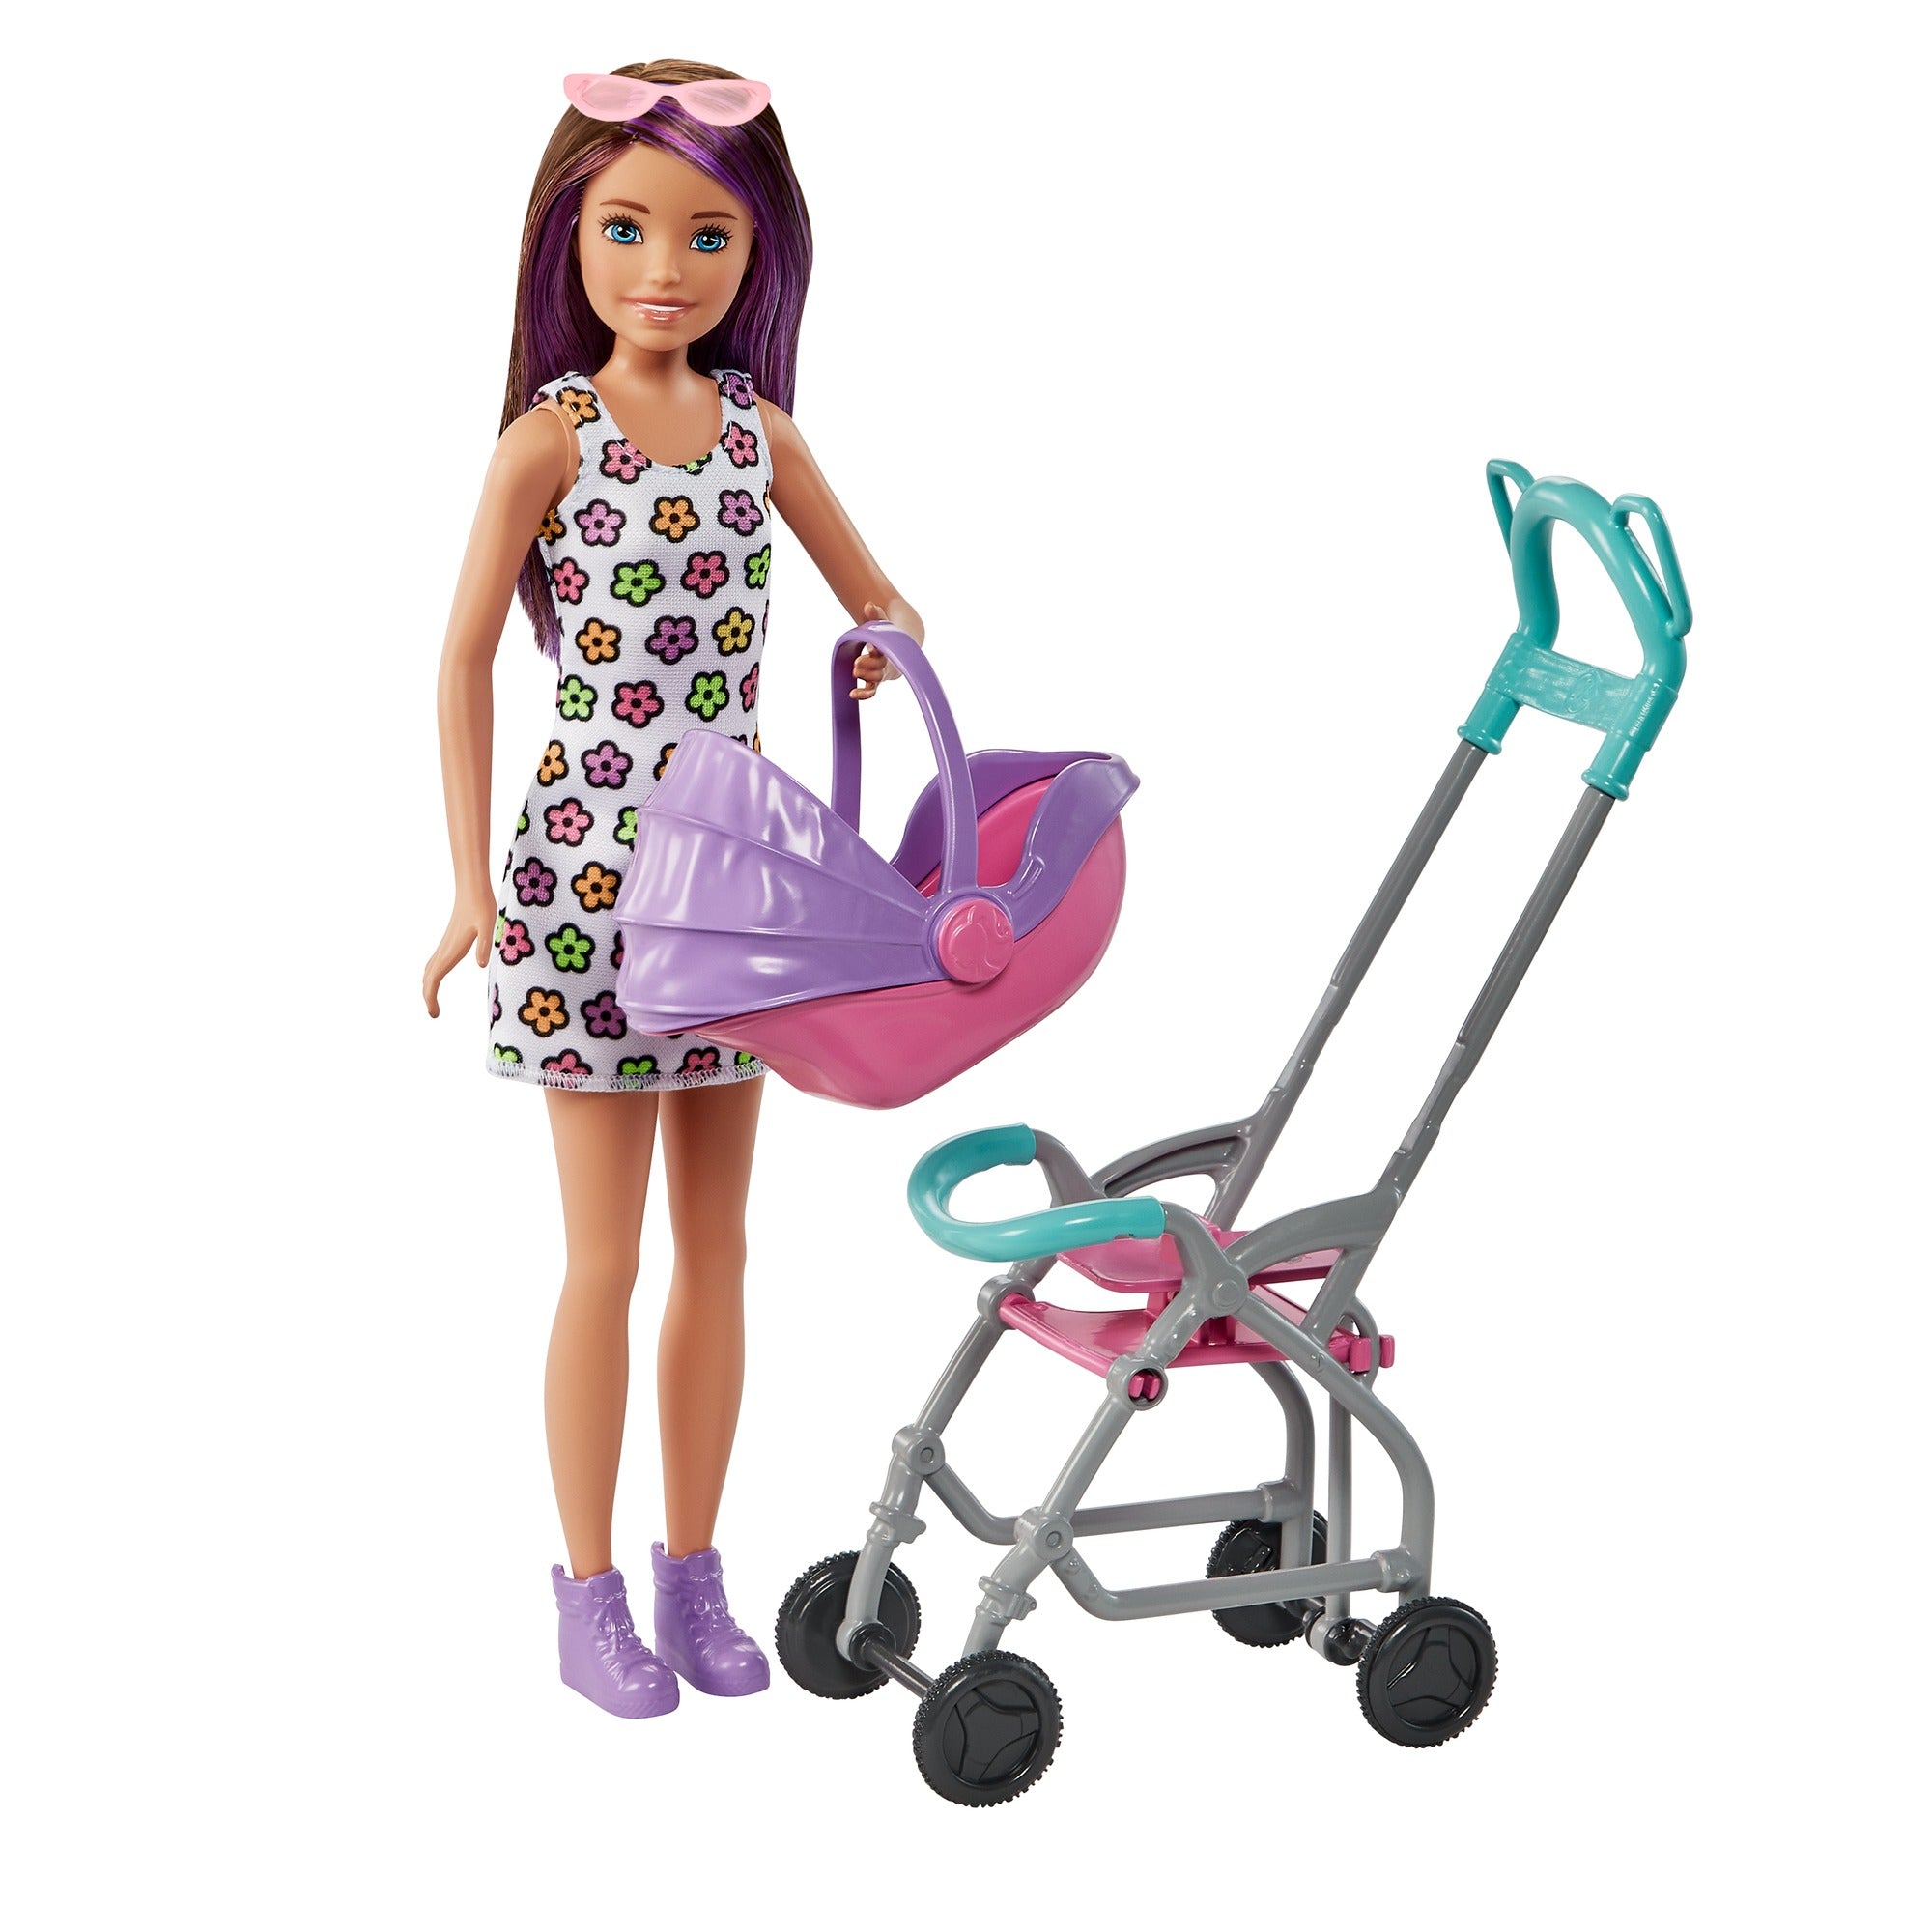 Barbie Skipper Babysitters Playset with Skipper Babysitter Brunette Doll, Stroller, Baby Doll & 5 Accessories for Kids Ages 3 Year & Up